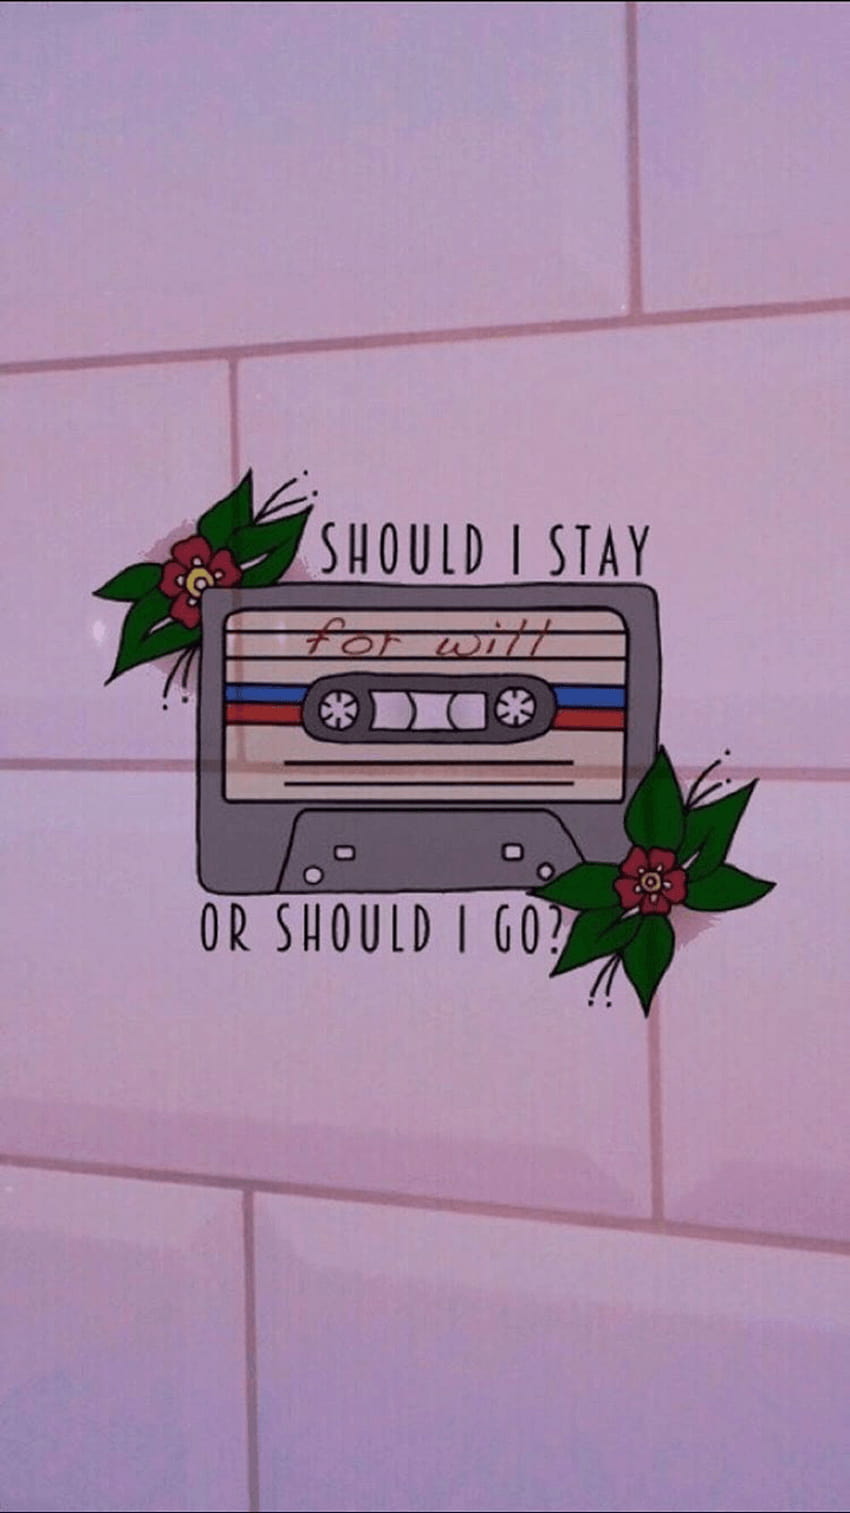 A cassette tape with flowers on it - Stranger Things